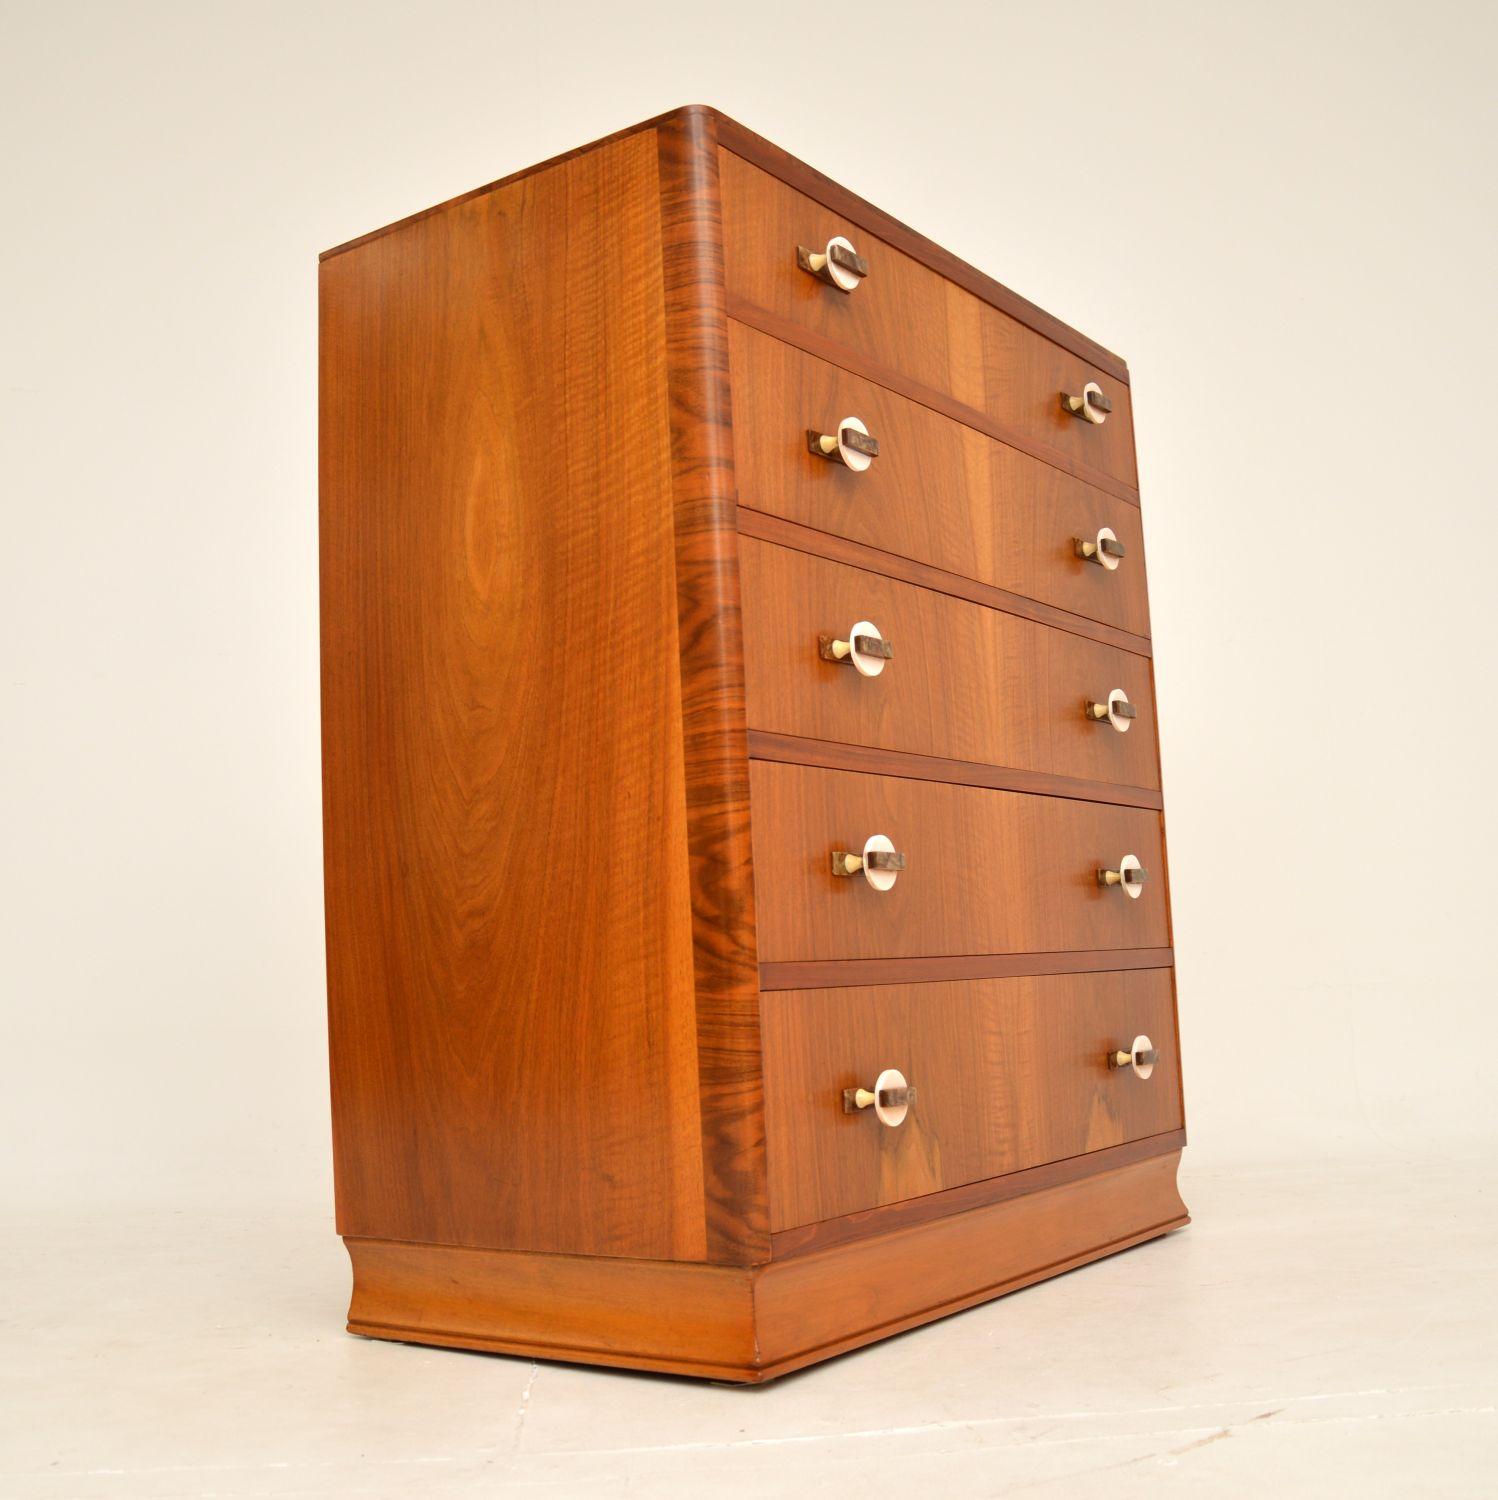 A beautiful original Art Deco period chest of drawers in walnut. This was made in England, it dates from the 1930’s.

It has a gorgeous and very useful design, with lots of storage space. The walnut has a lovely colour and striking grain patterns,